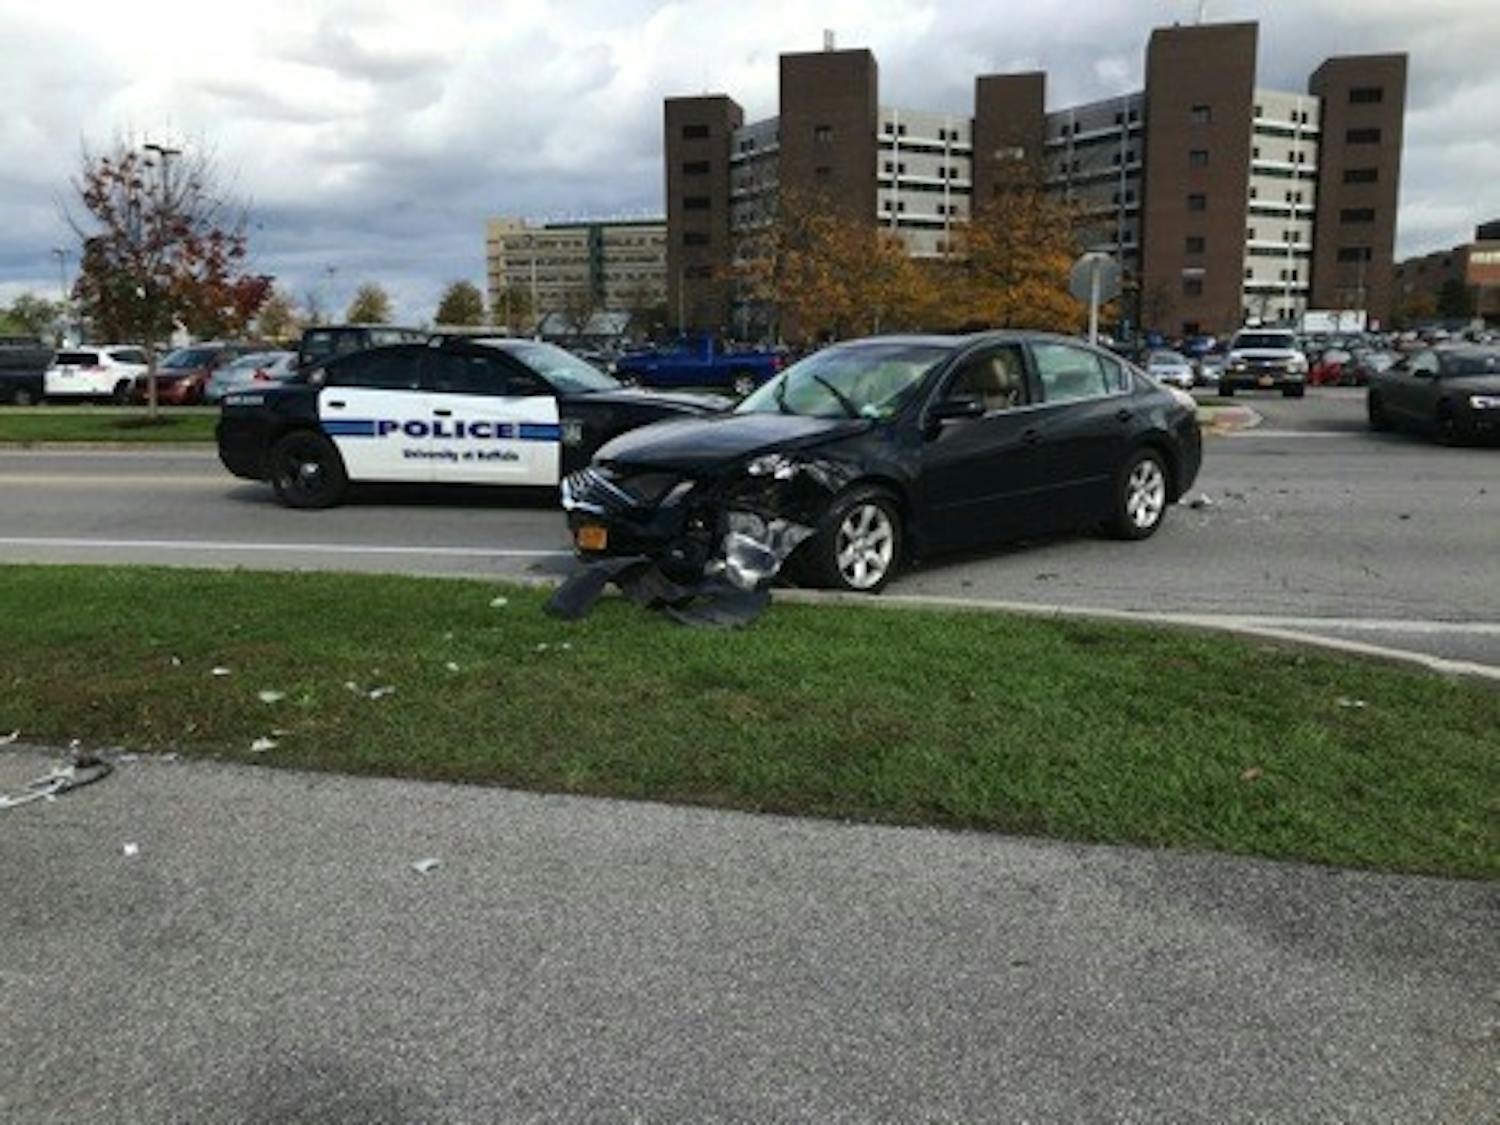 Two UB student got into a car accident outside the Hochstetter B parking lot on Augspurger Road. Neither students were seriously injured, but one car had to be towed.&nbsp;